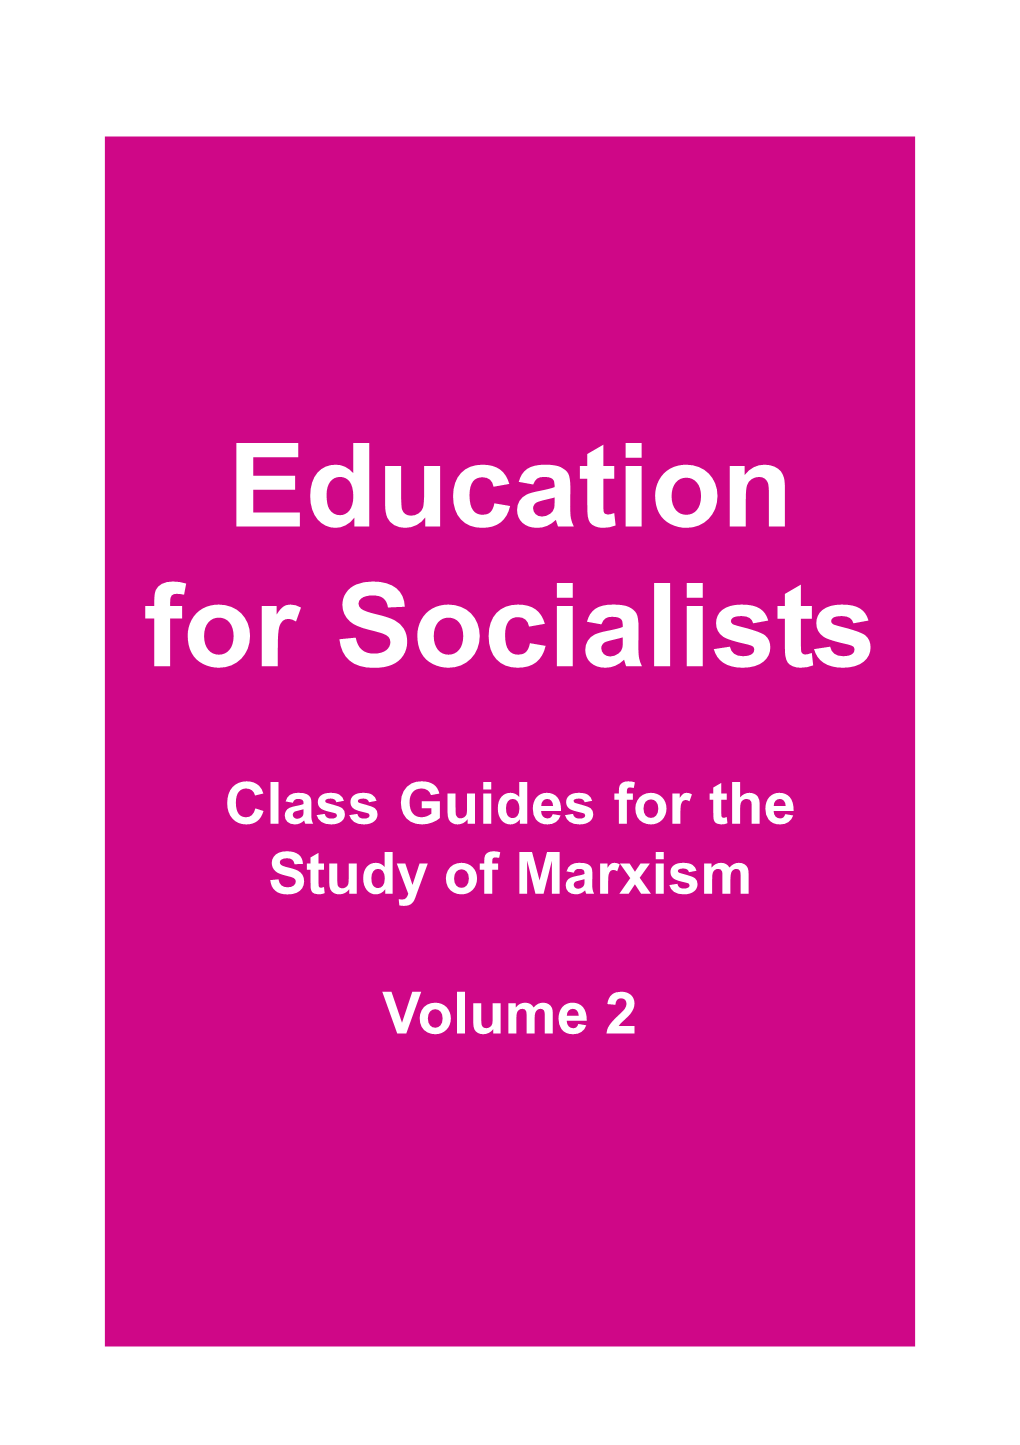 Education for Socialists